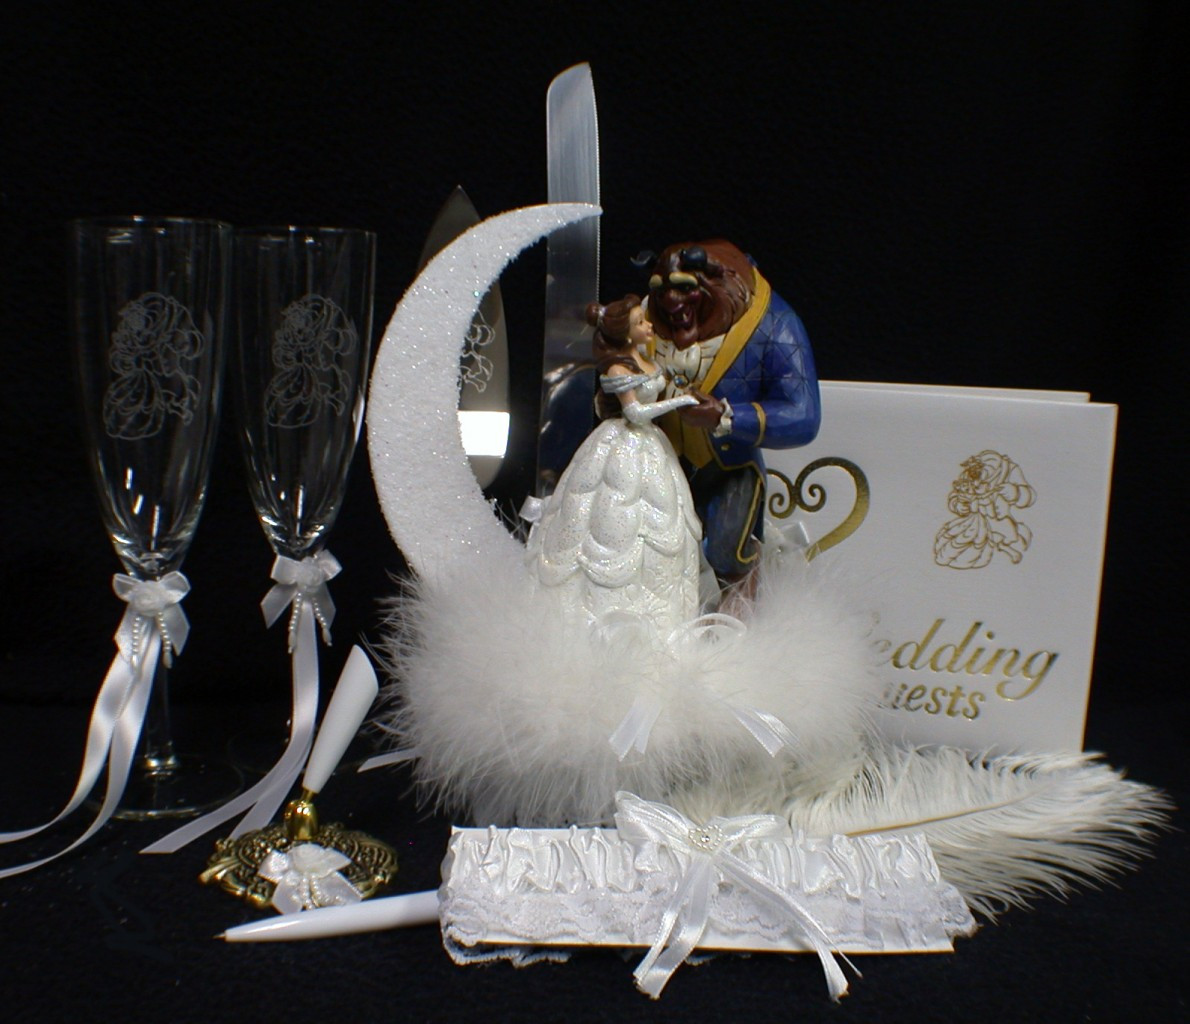 Beauty And The Beast Wedding Cake Topper
 DISNEY Beauty & the Beast Wedding Cake Topper LOT Glasses